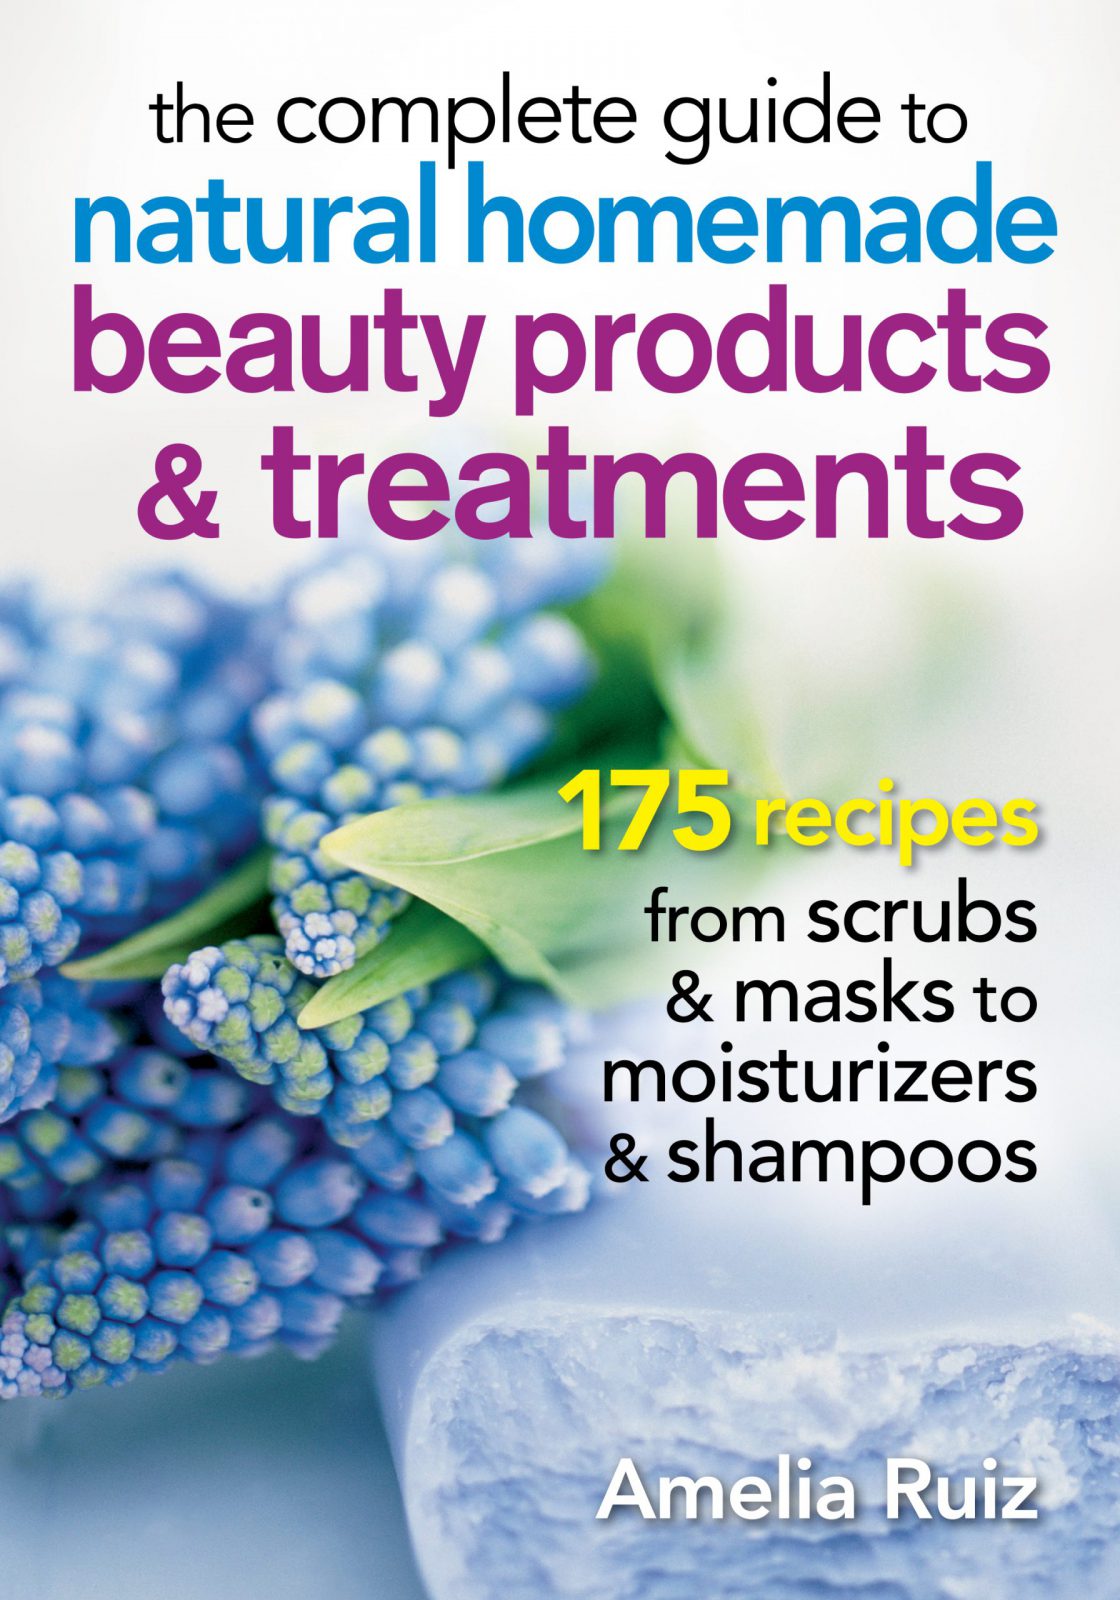 The Complete Guide to Natural Homemade Beauty Products and Treatments